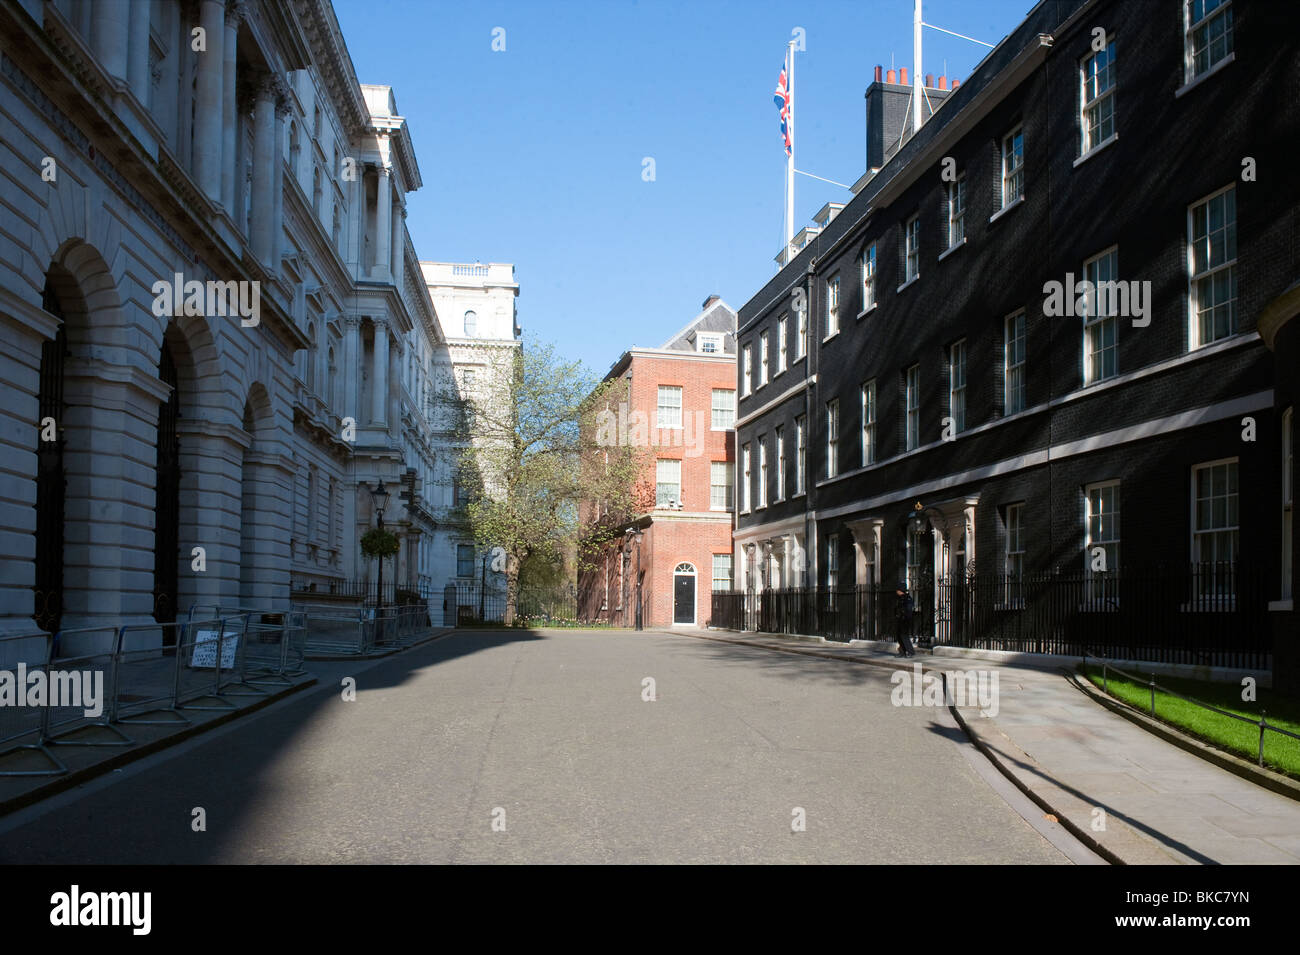 No 10 Downing Street in London, England. Residence of the Prime minister of Great Britain Stock Photo